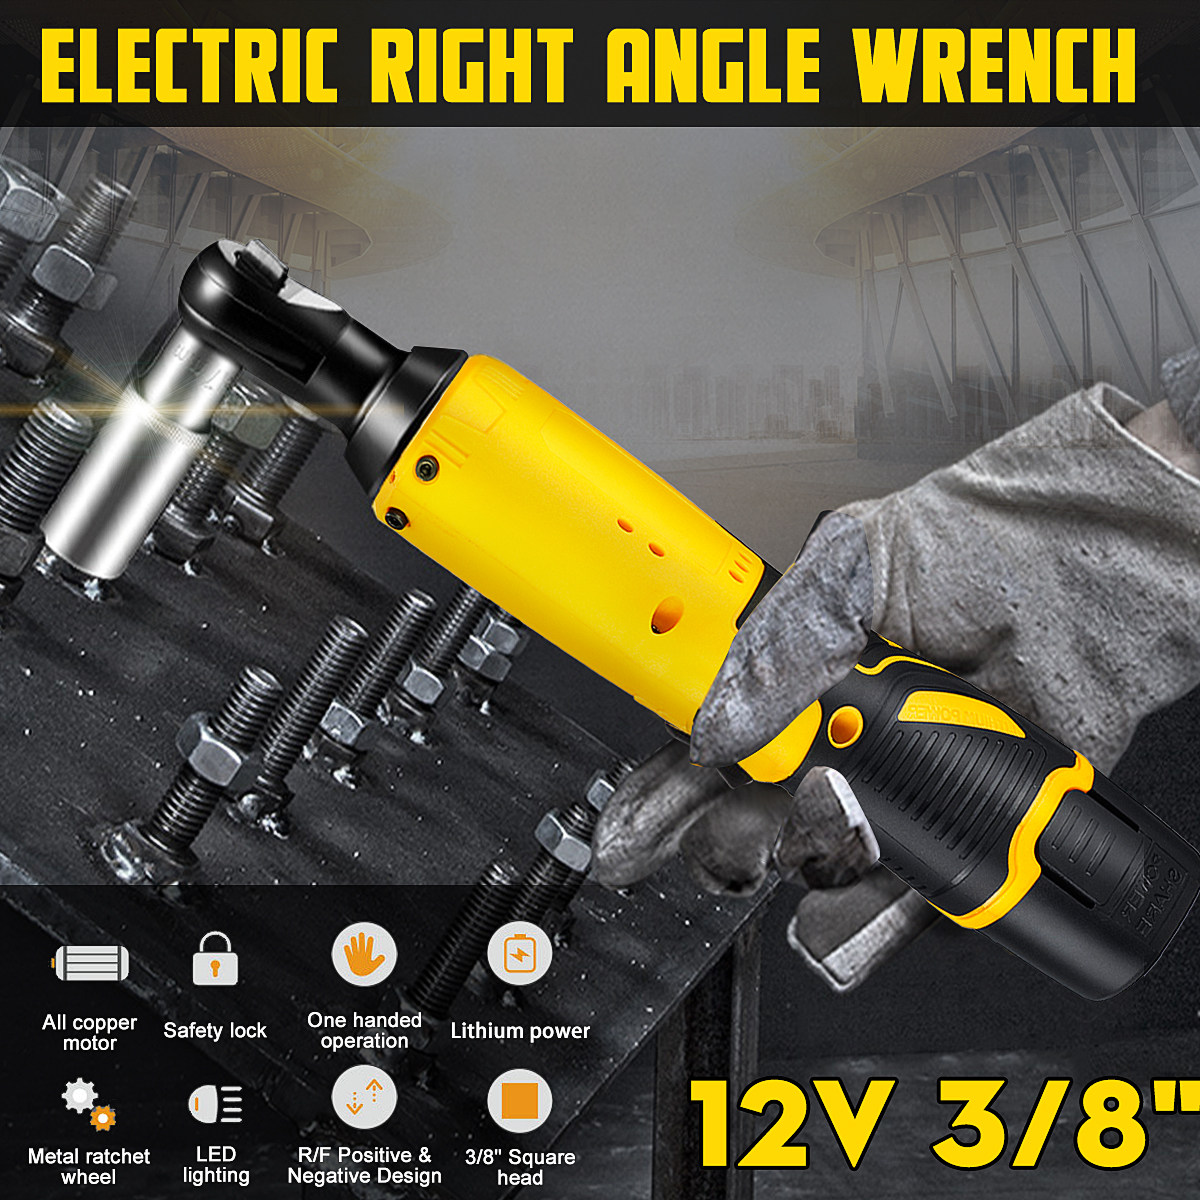 12V 45N.m Ratchet Wrench Electric Rechargeable Ratchet 90° Right Angle Wrench Powerful Tool